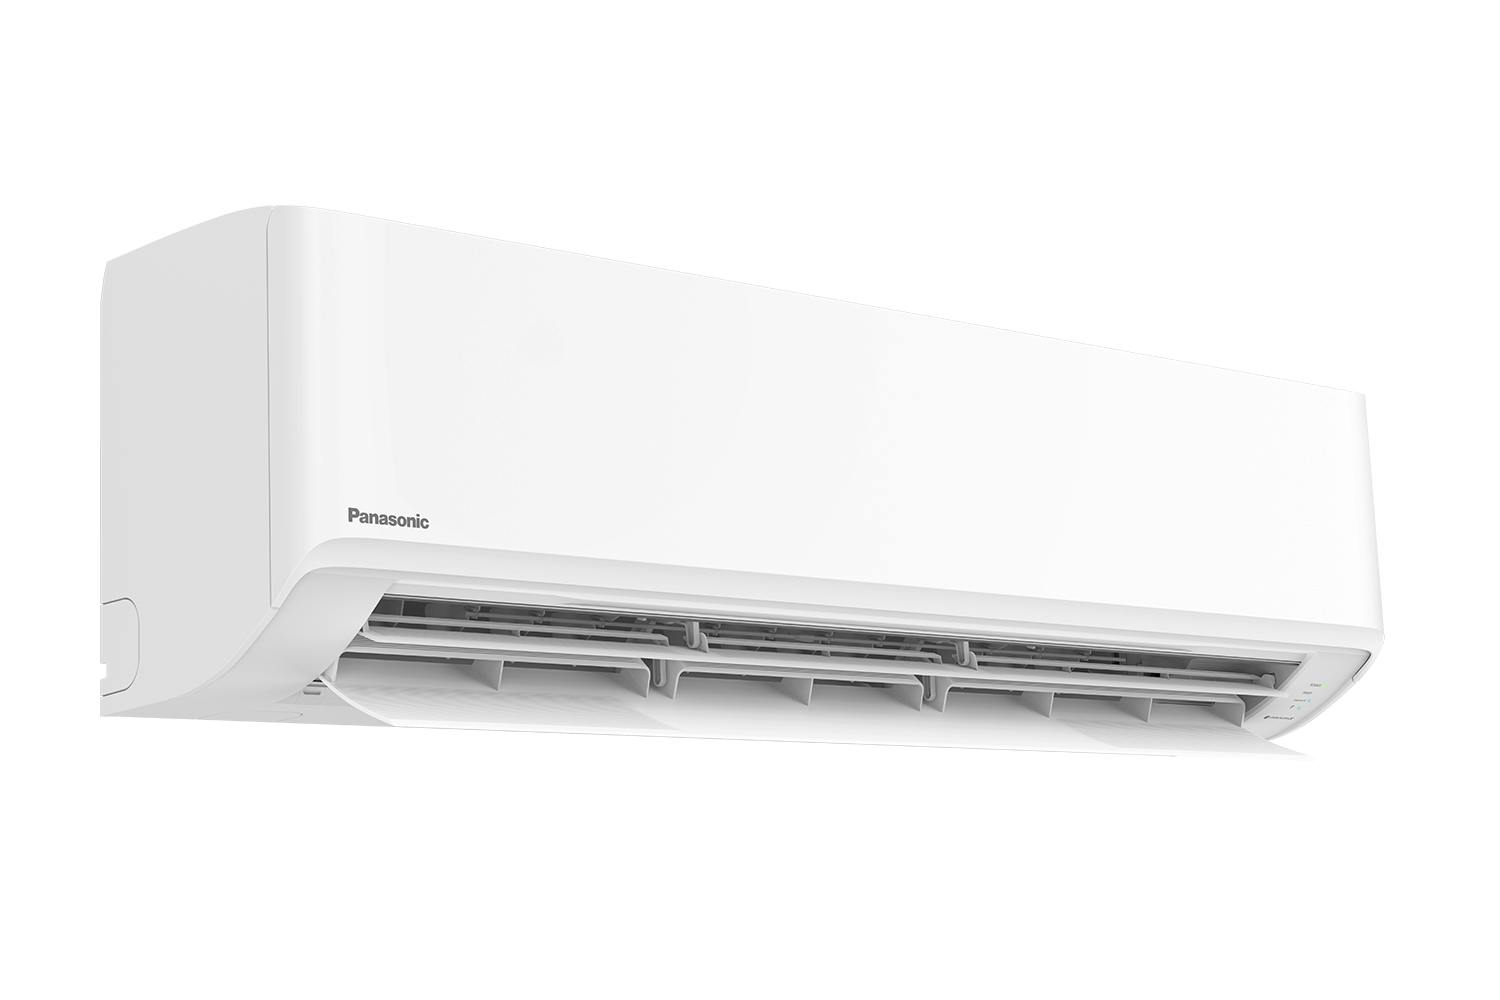 Panasonic Z60 Heat Pump Air Conditioner - 7.2KW Heat/6.0KW Cool - (Indoor and Outdoor Kit/High Wall/Split System)